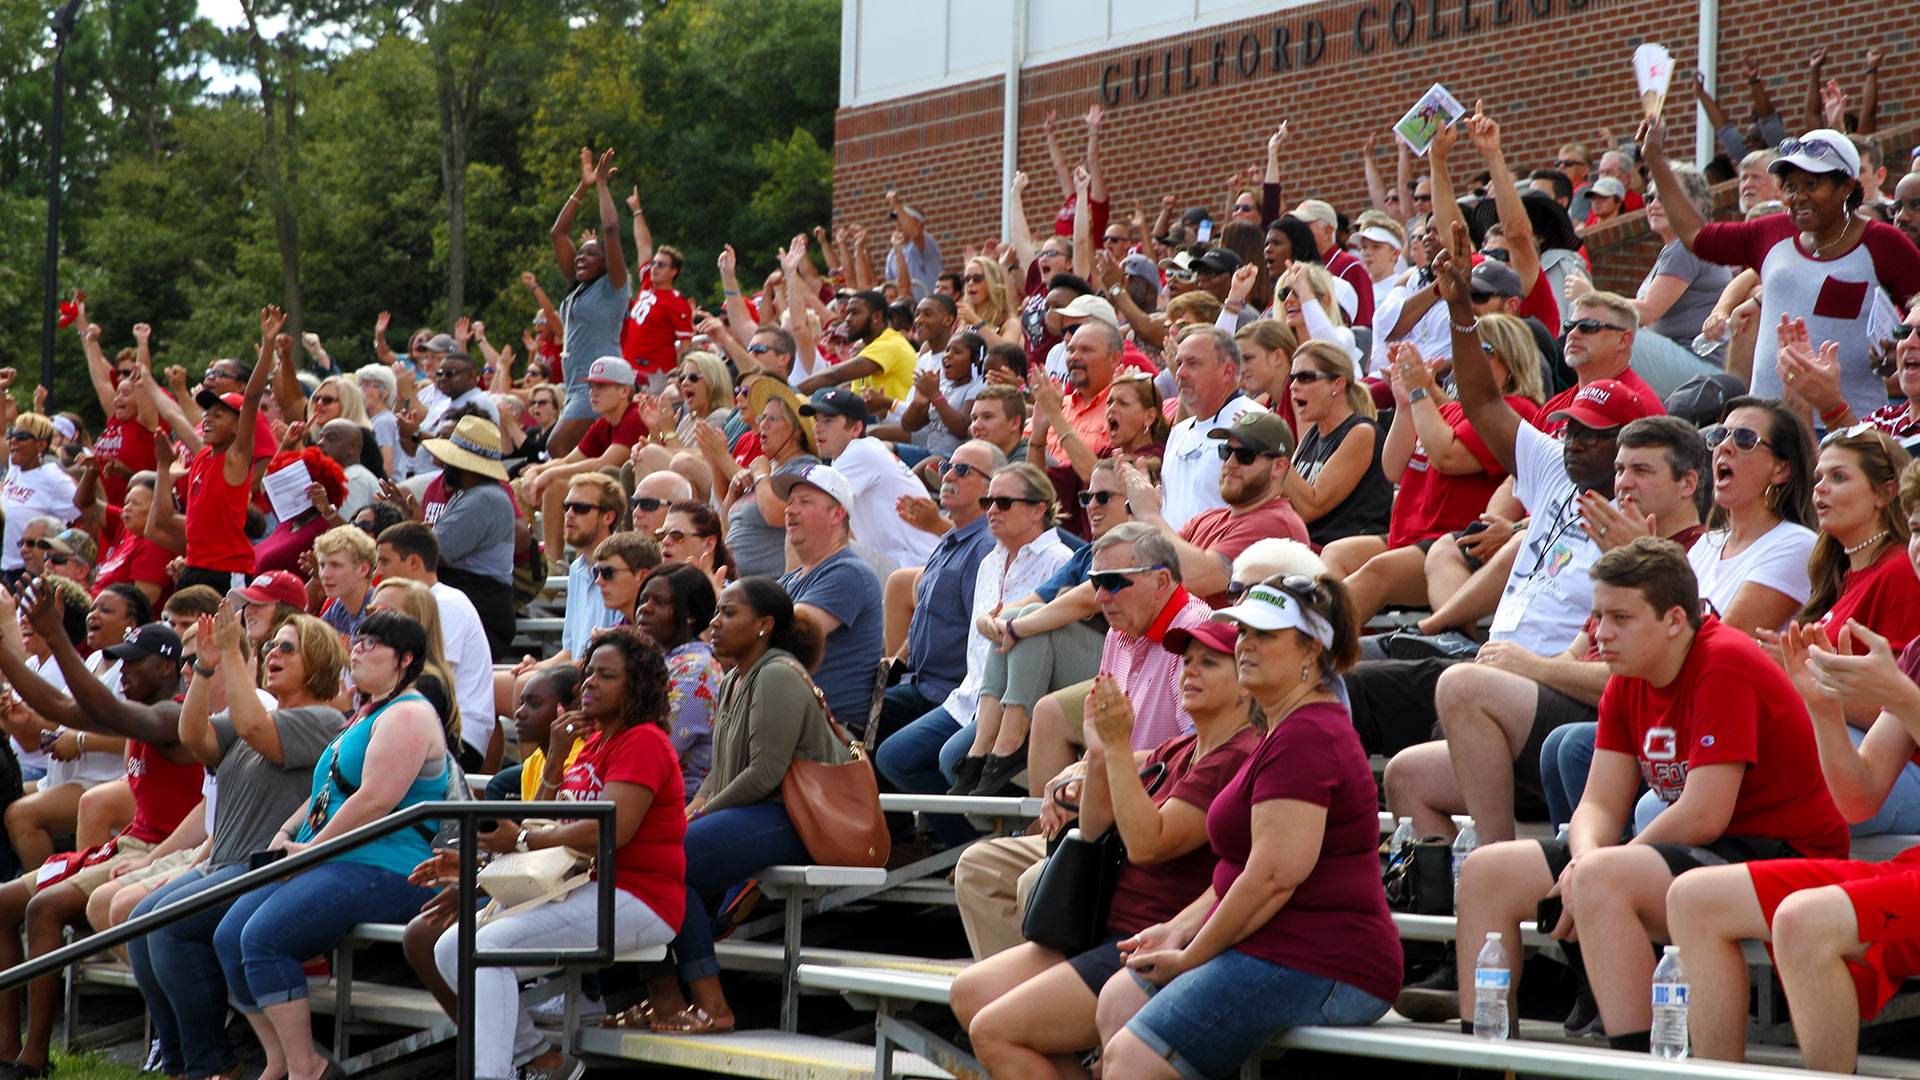 The stands fill up and fans cheer as Guilford takes on Bridgewater at the Homecoming football game.